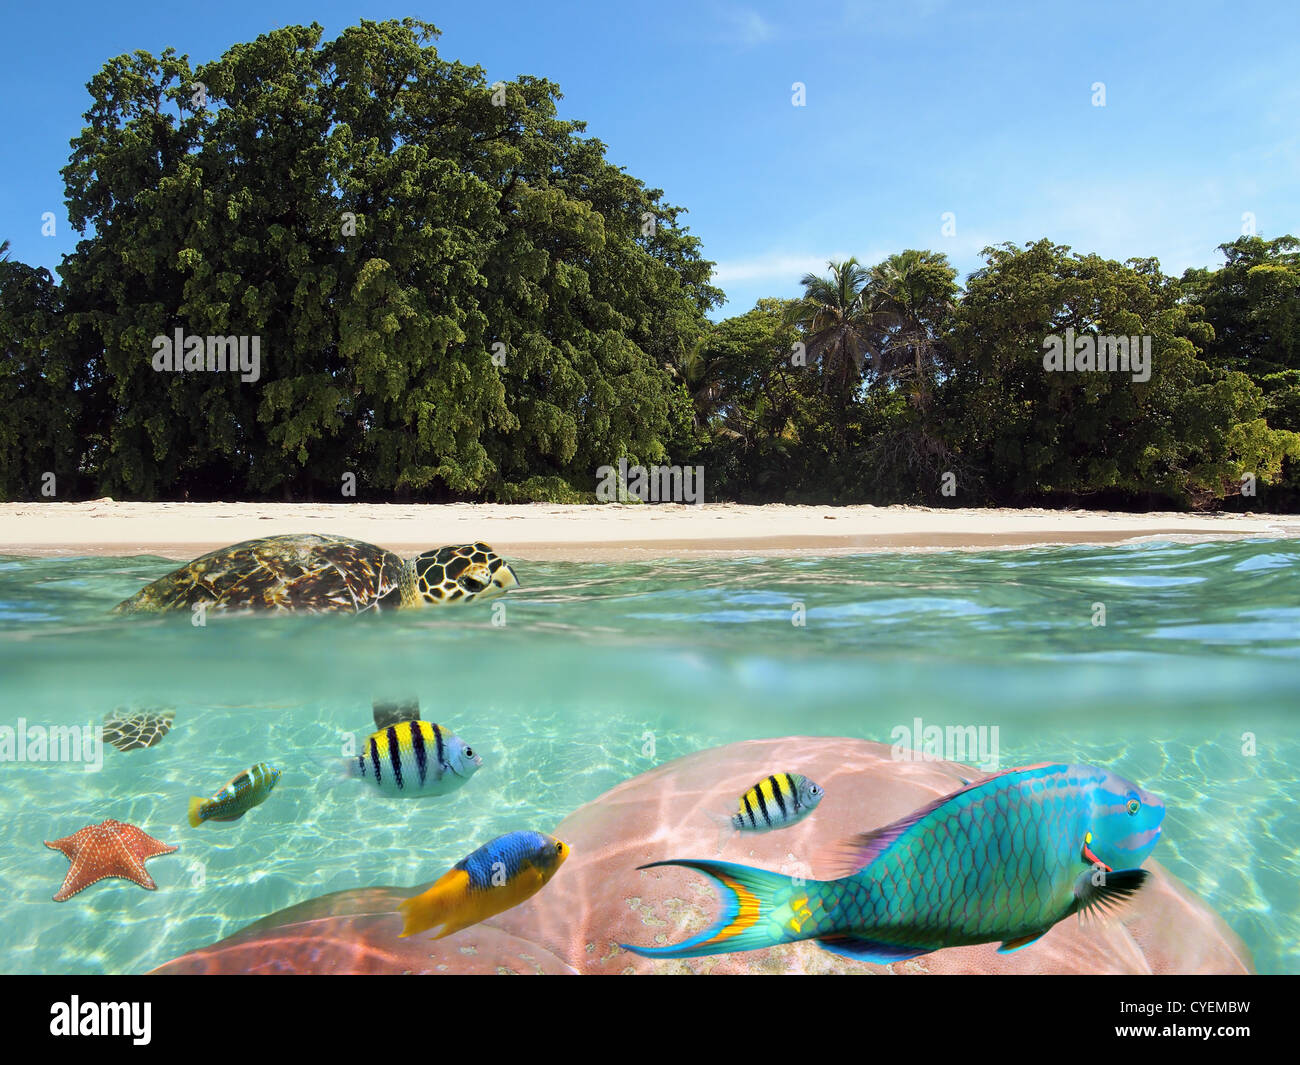 Tropical beach shore with a turtle on water surface and colorful coral and fish underwater, Caribbean sea Stock Photo